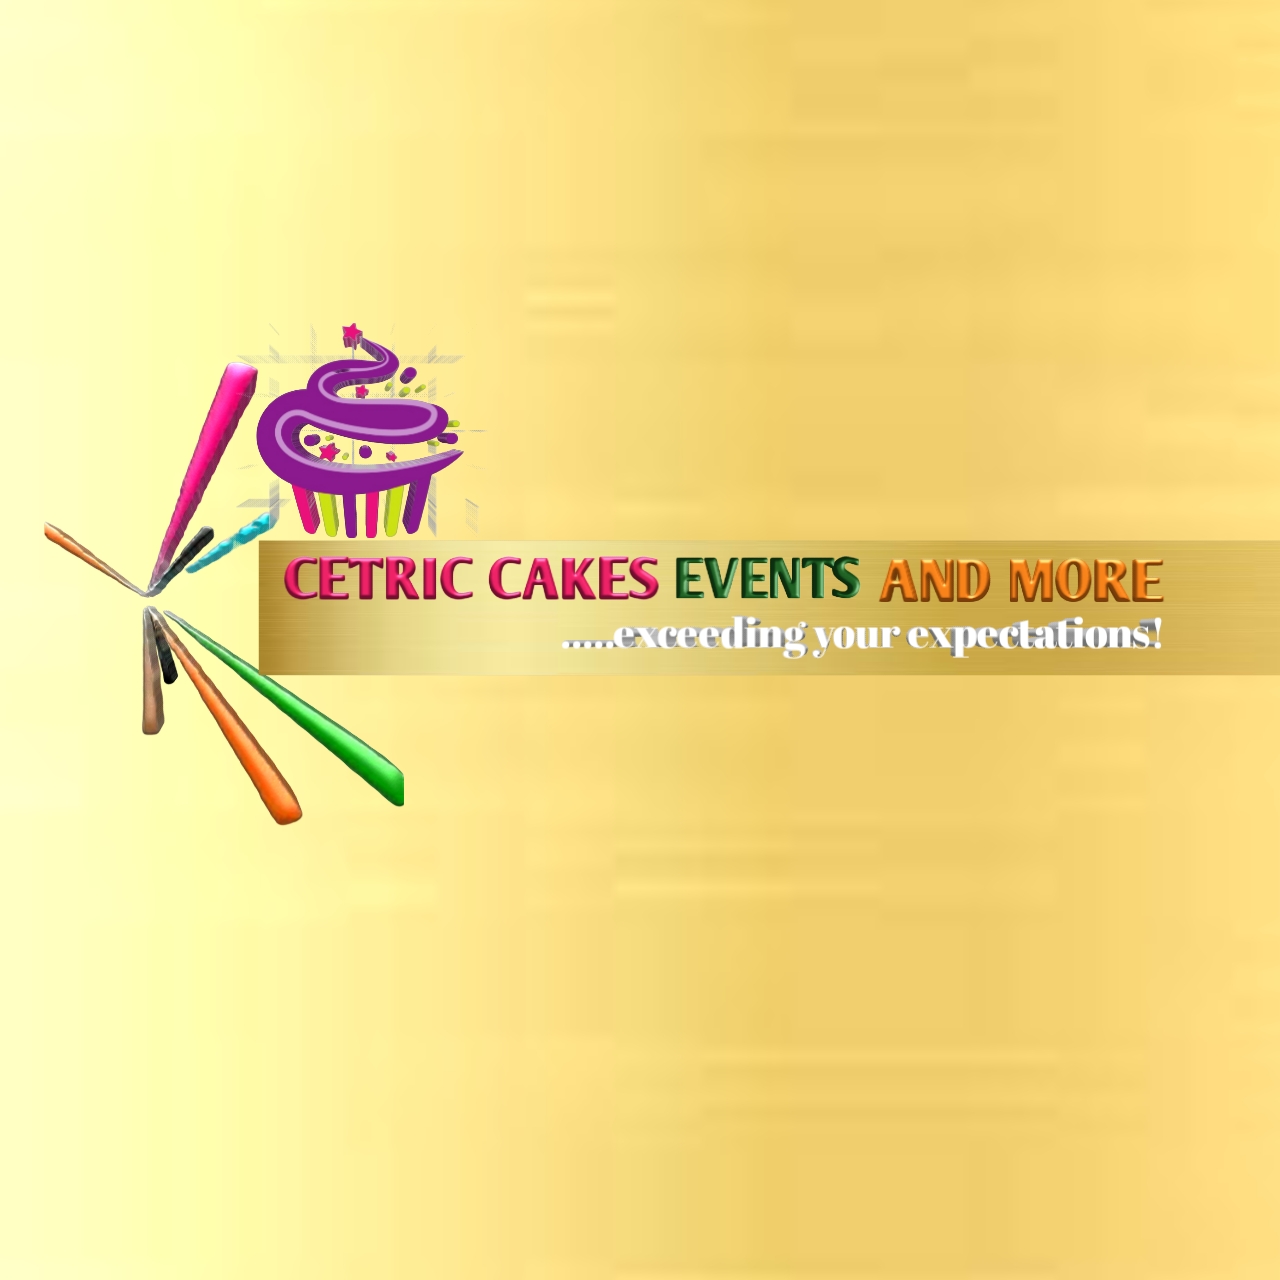 Cetric Cakes Events and More provider